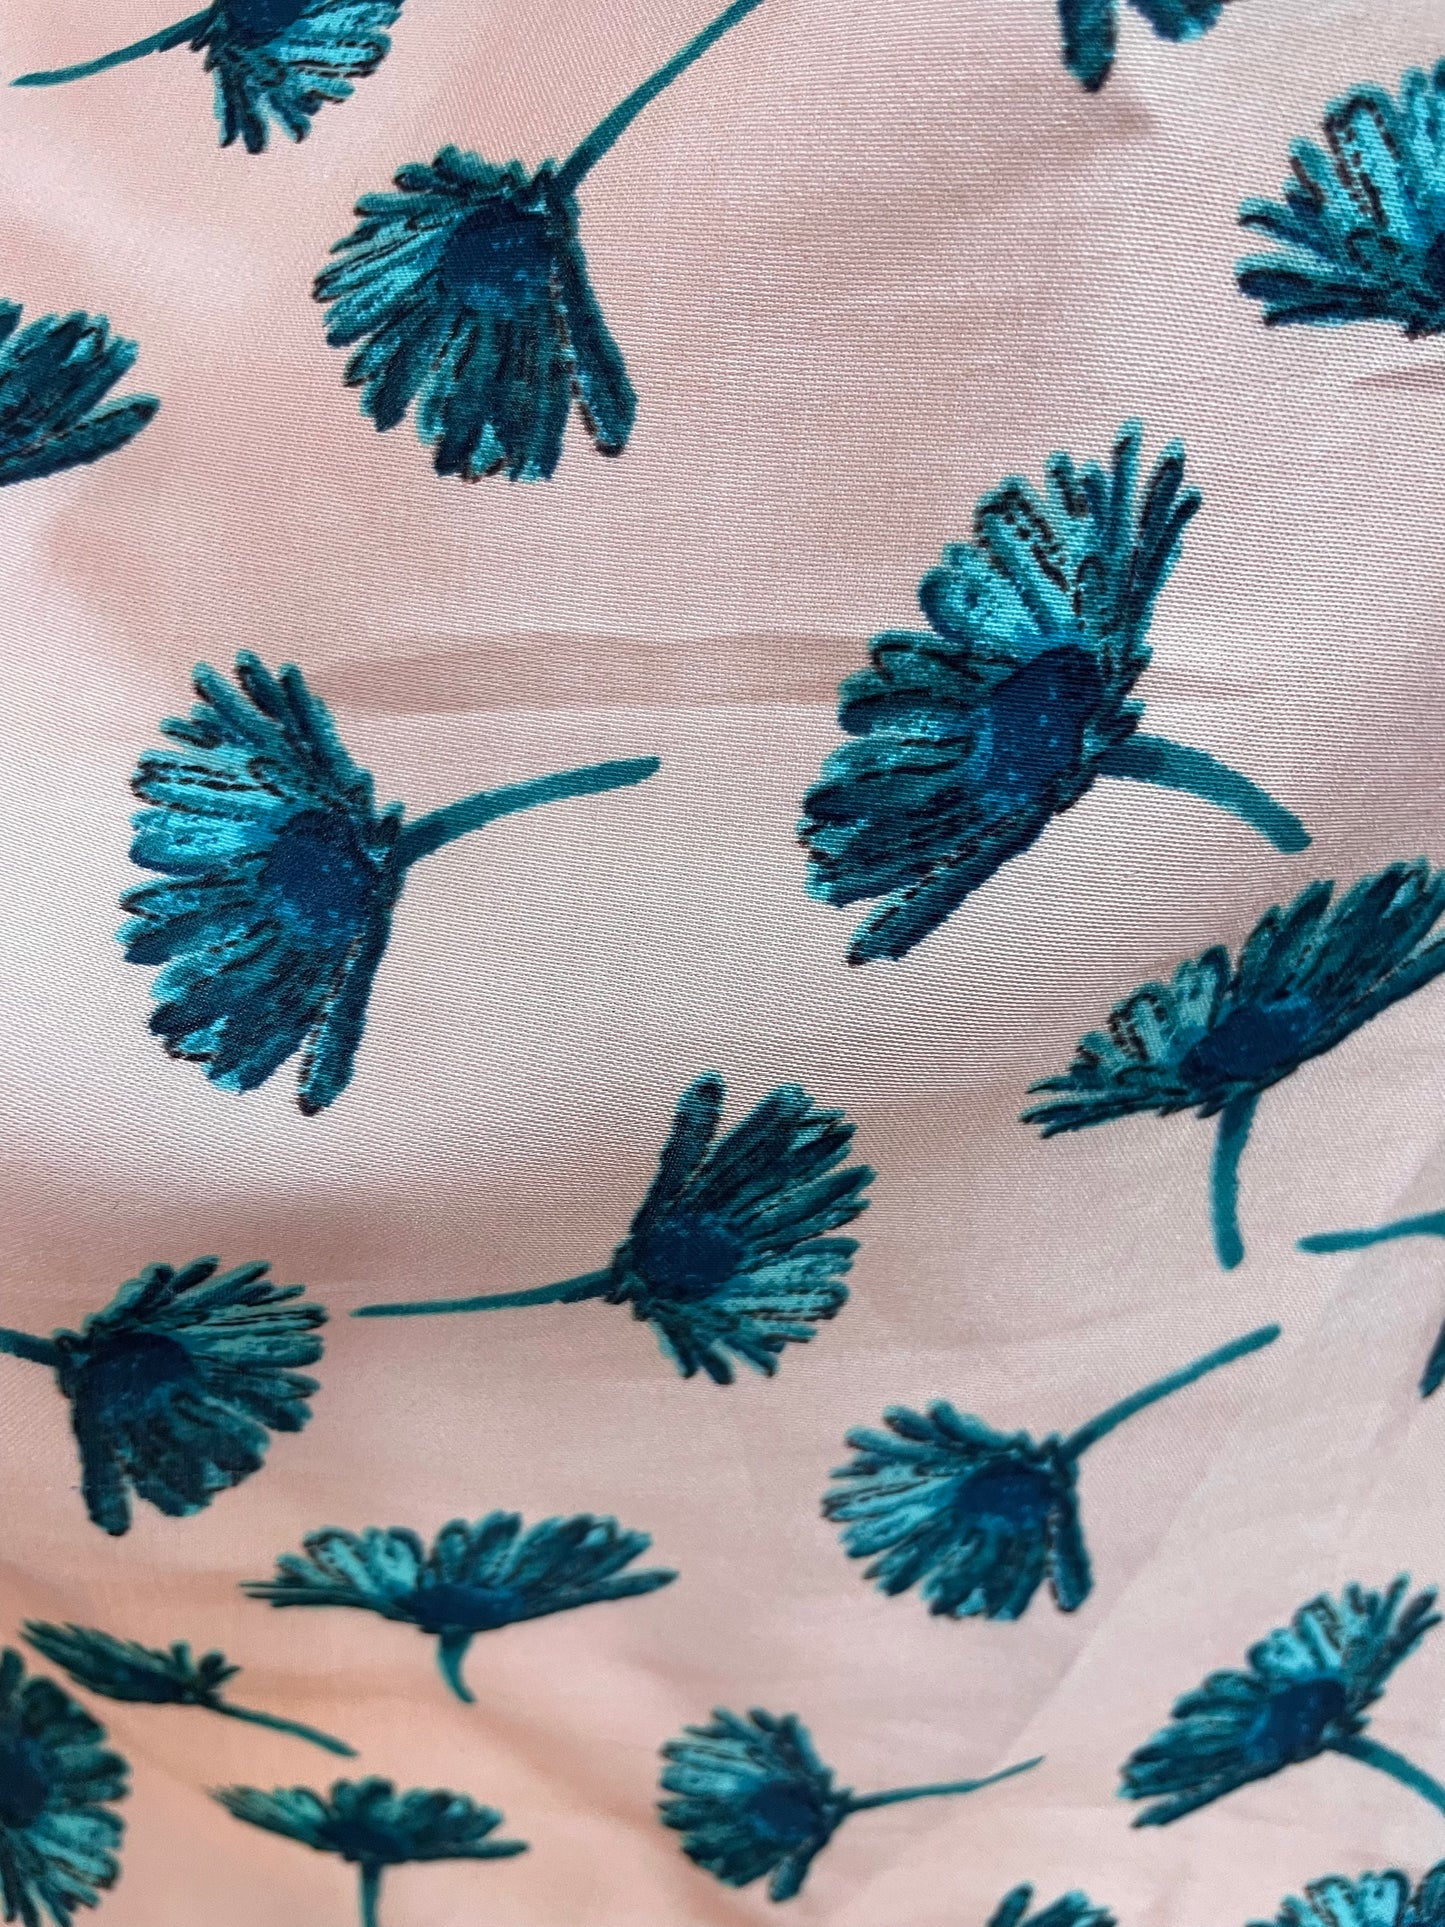 Floral Patterned Rayon - Peach & Teal